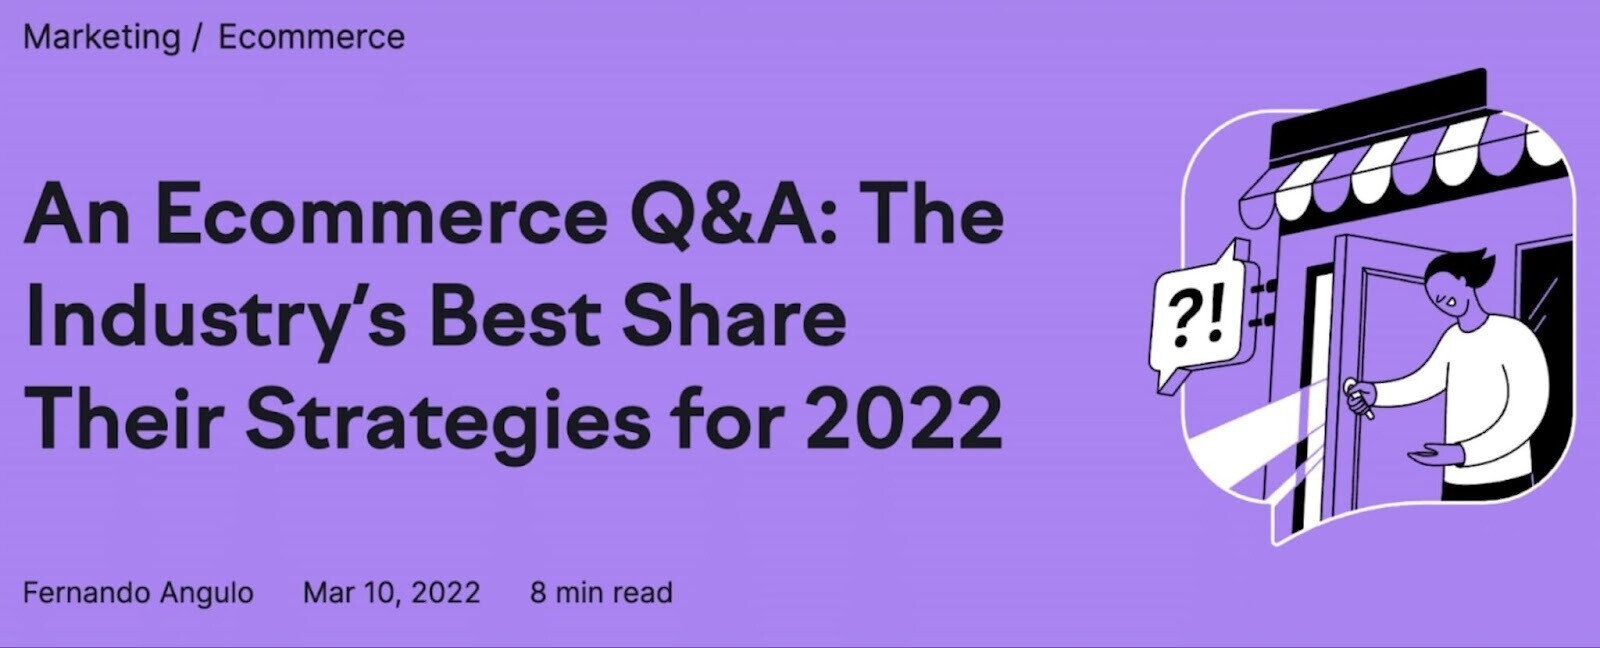 "An Ecommerce Q&A: The Industry’s Best Share Their Strategies for 2022" title